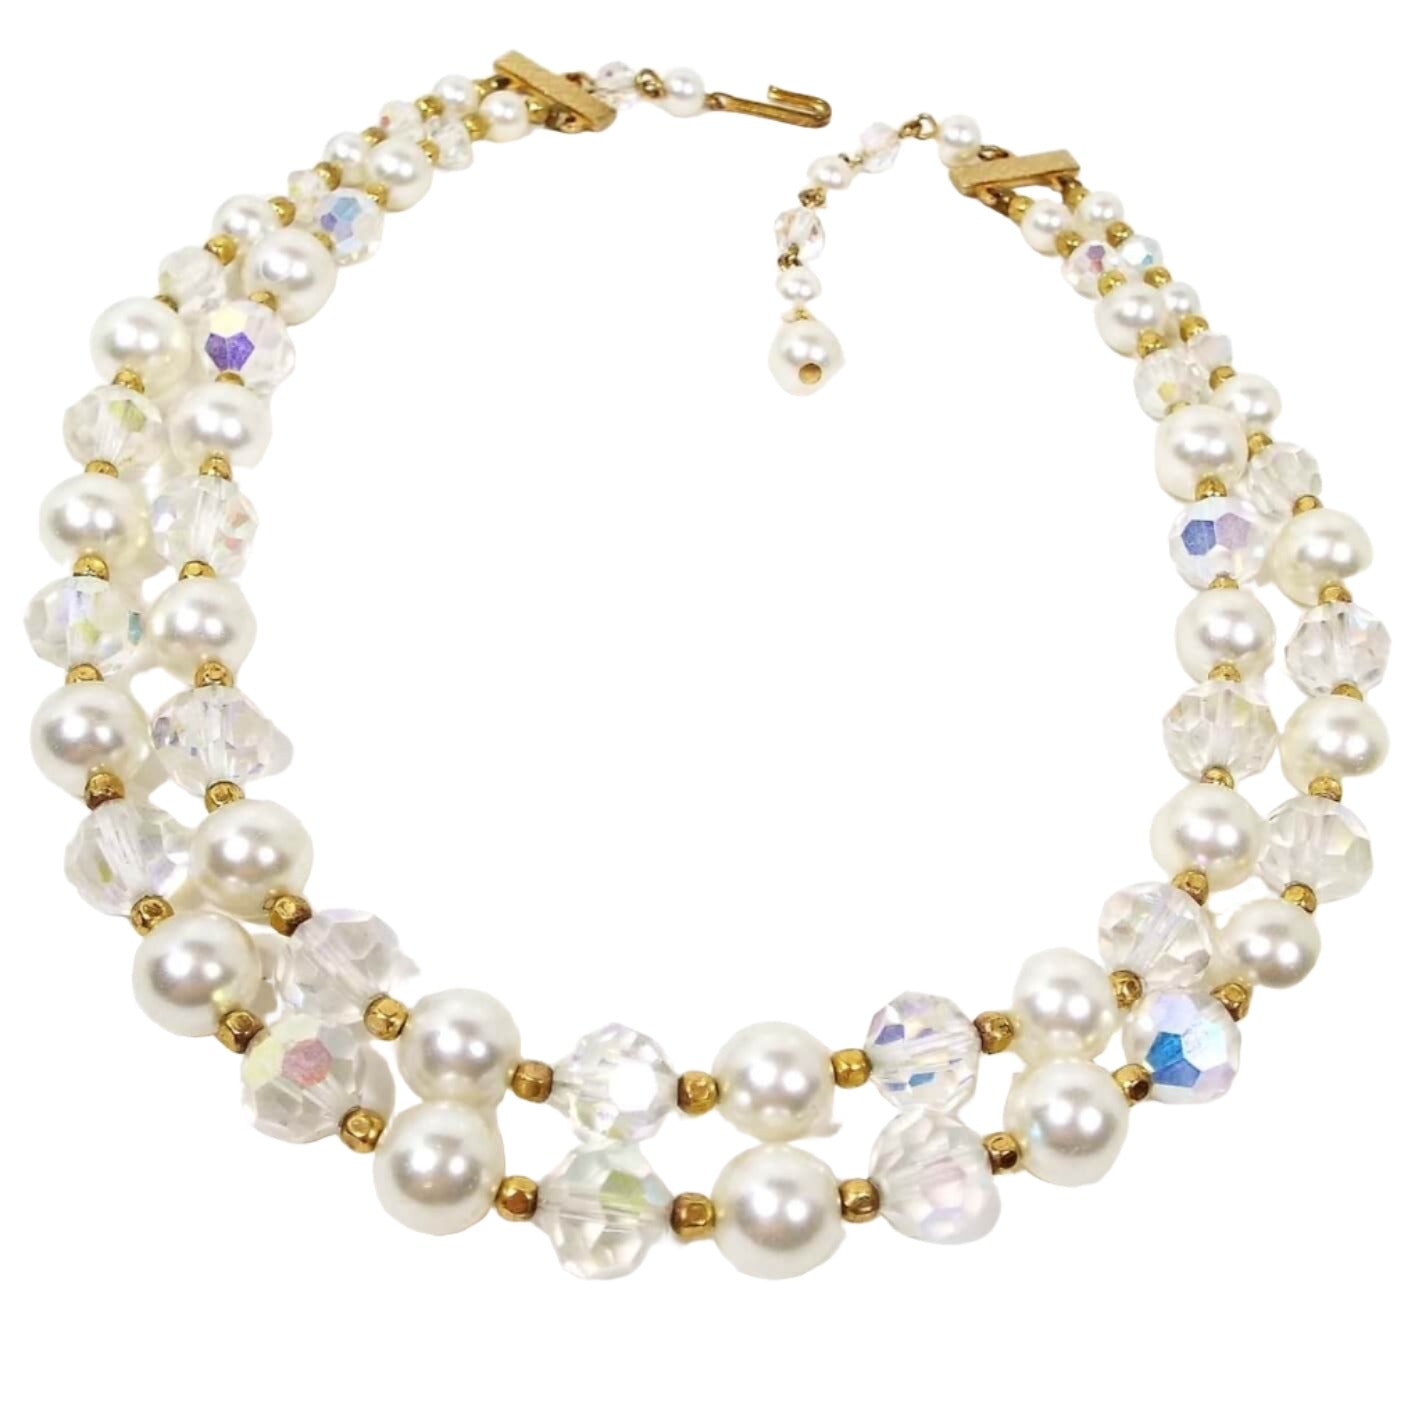 Top view of the Mid Century vintage faux pearl and AB crystal multi strand necklace. There are two strands of beads. Each strand alternates between a plastic imitation pearl and an AB glass crystal bead with small gold tone color beads in between. The hook clasp and other metal components are gold tone in color.